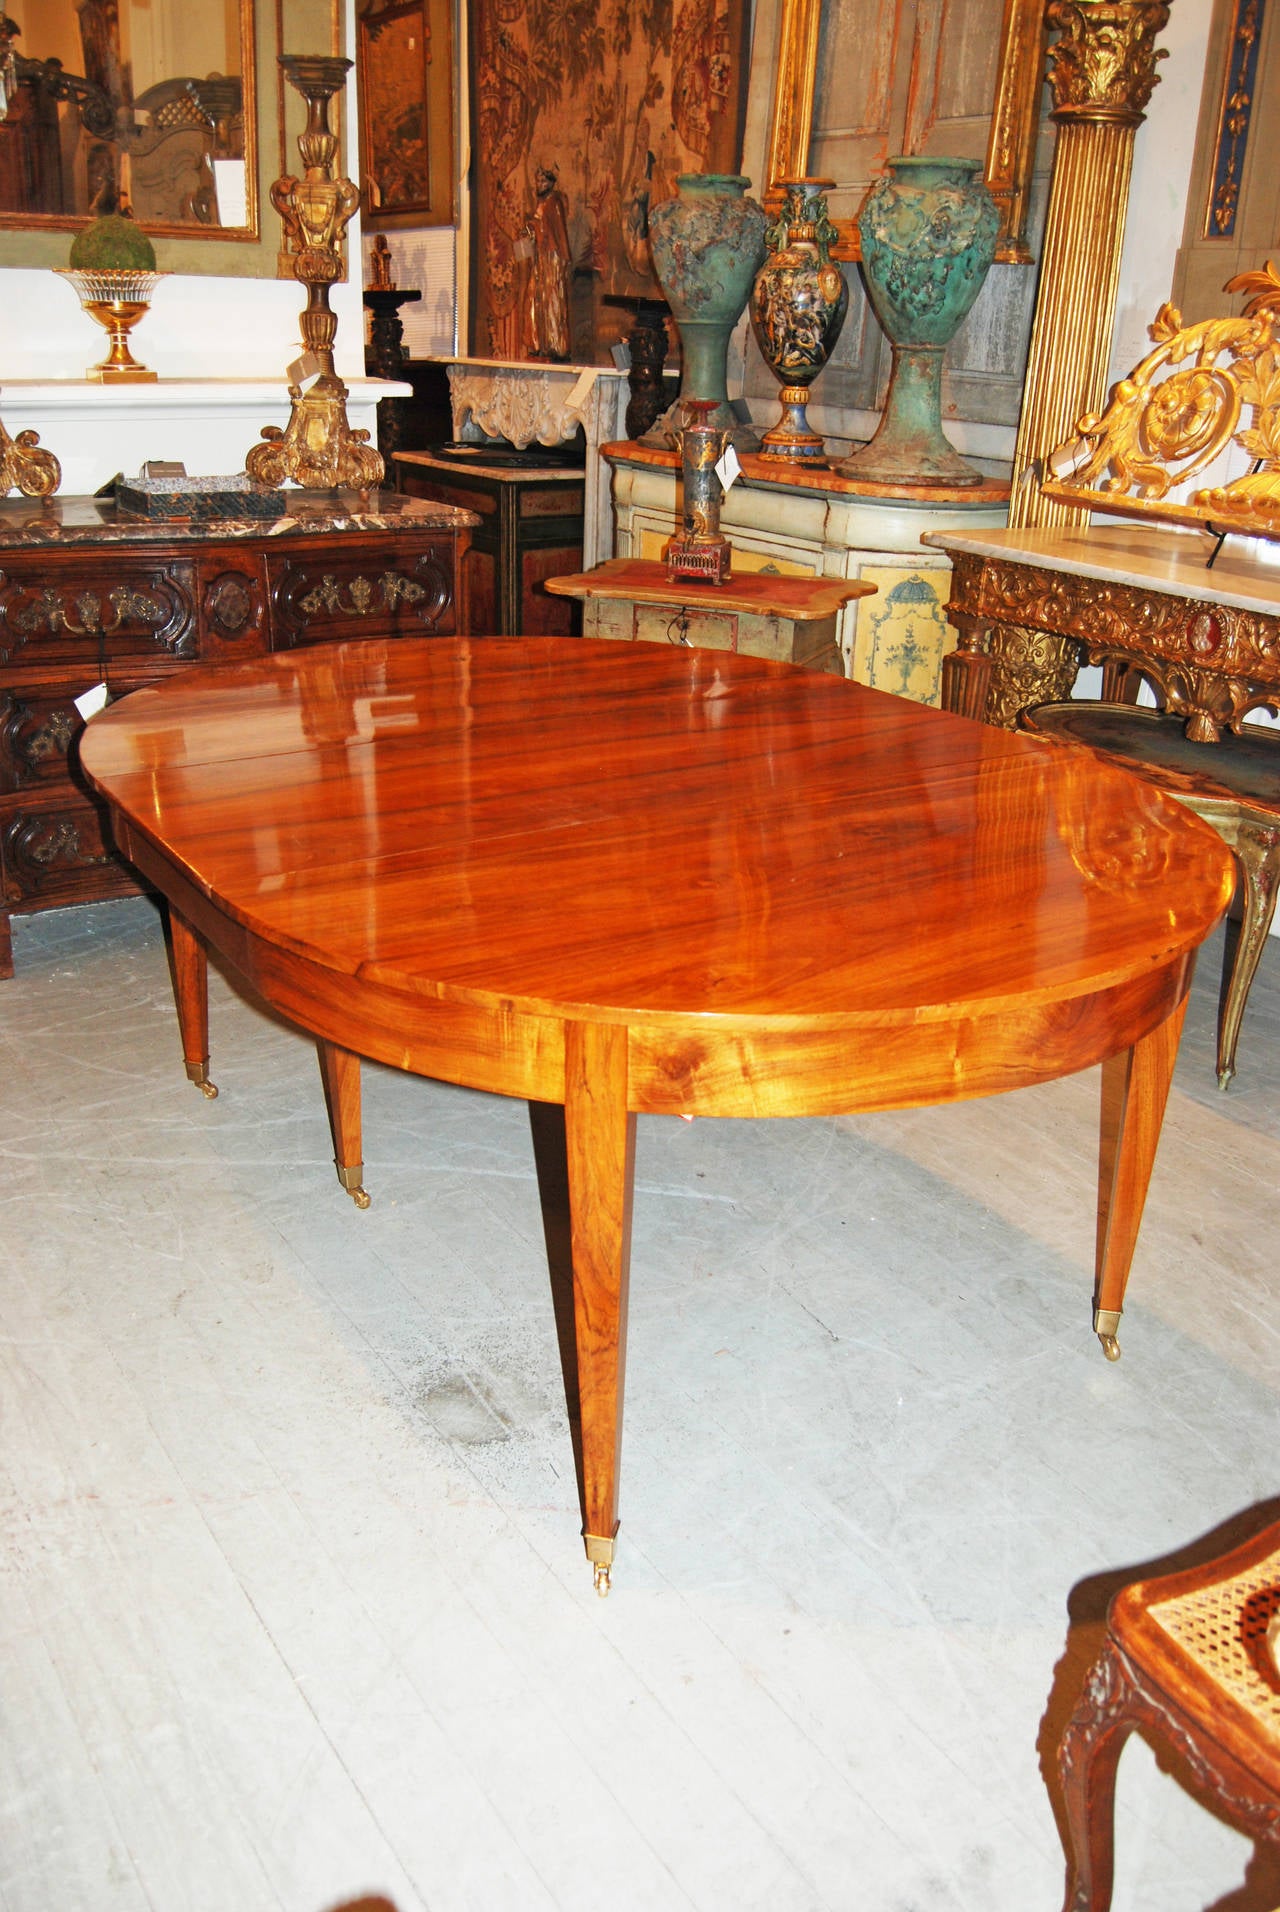 Beautiful pearwood extension table with two finished leaves and two unfinished leaves.